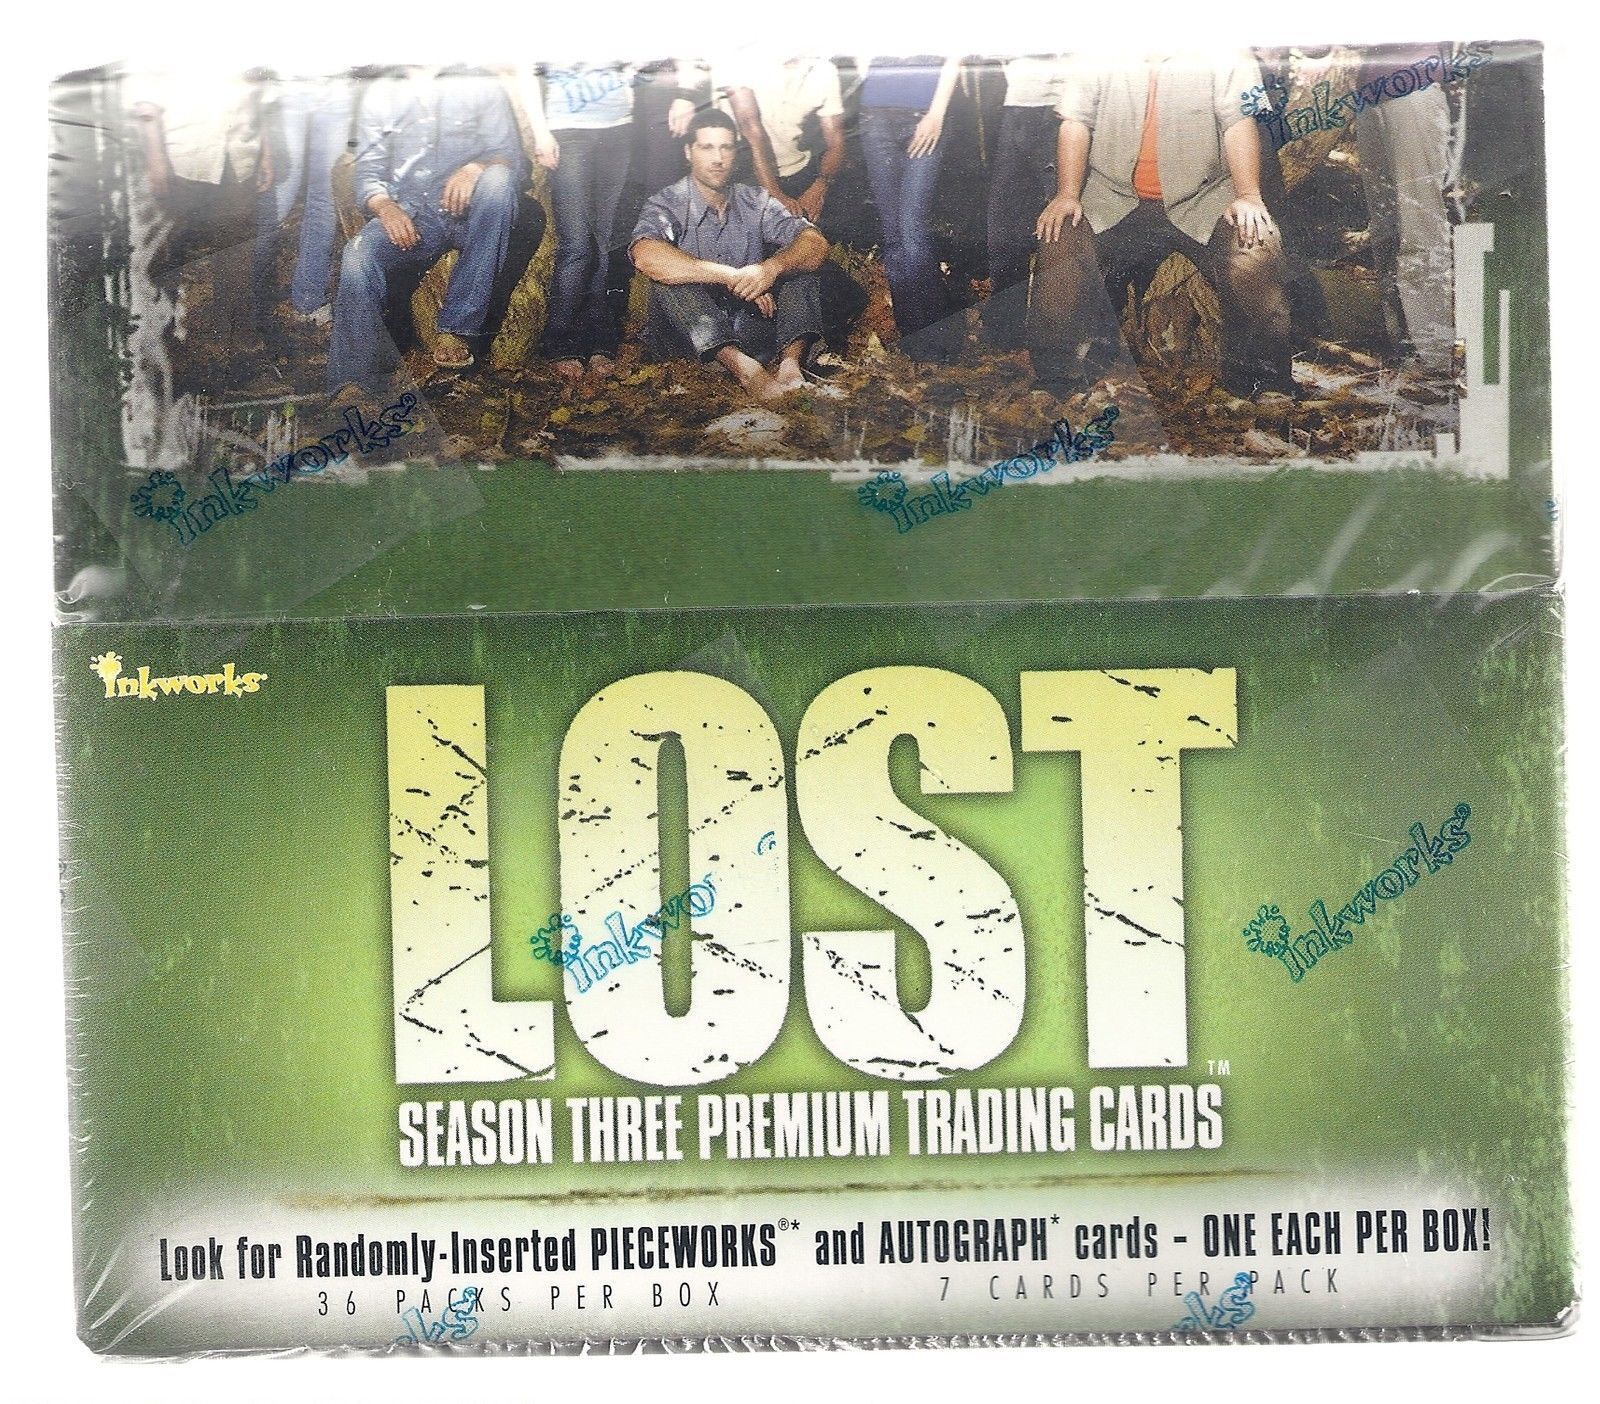 1 (ONE) Lost Season 3 Inkworks trading cards pack Autograph? Wardrobe? Insert?